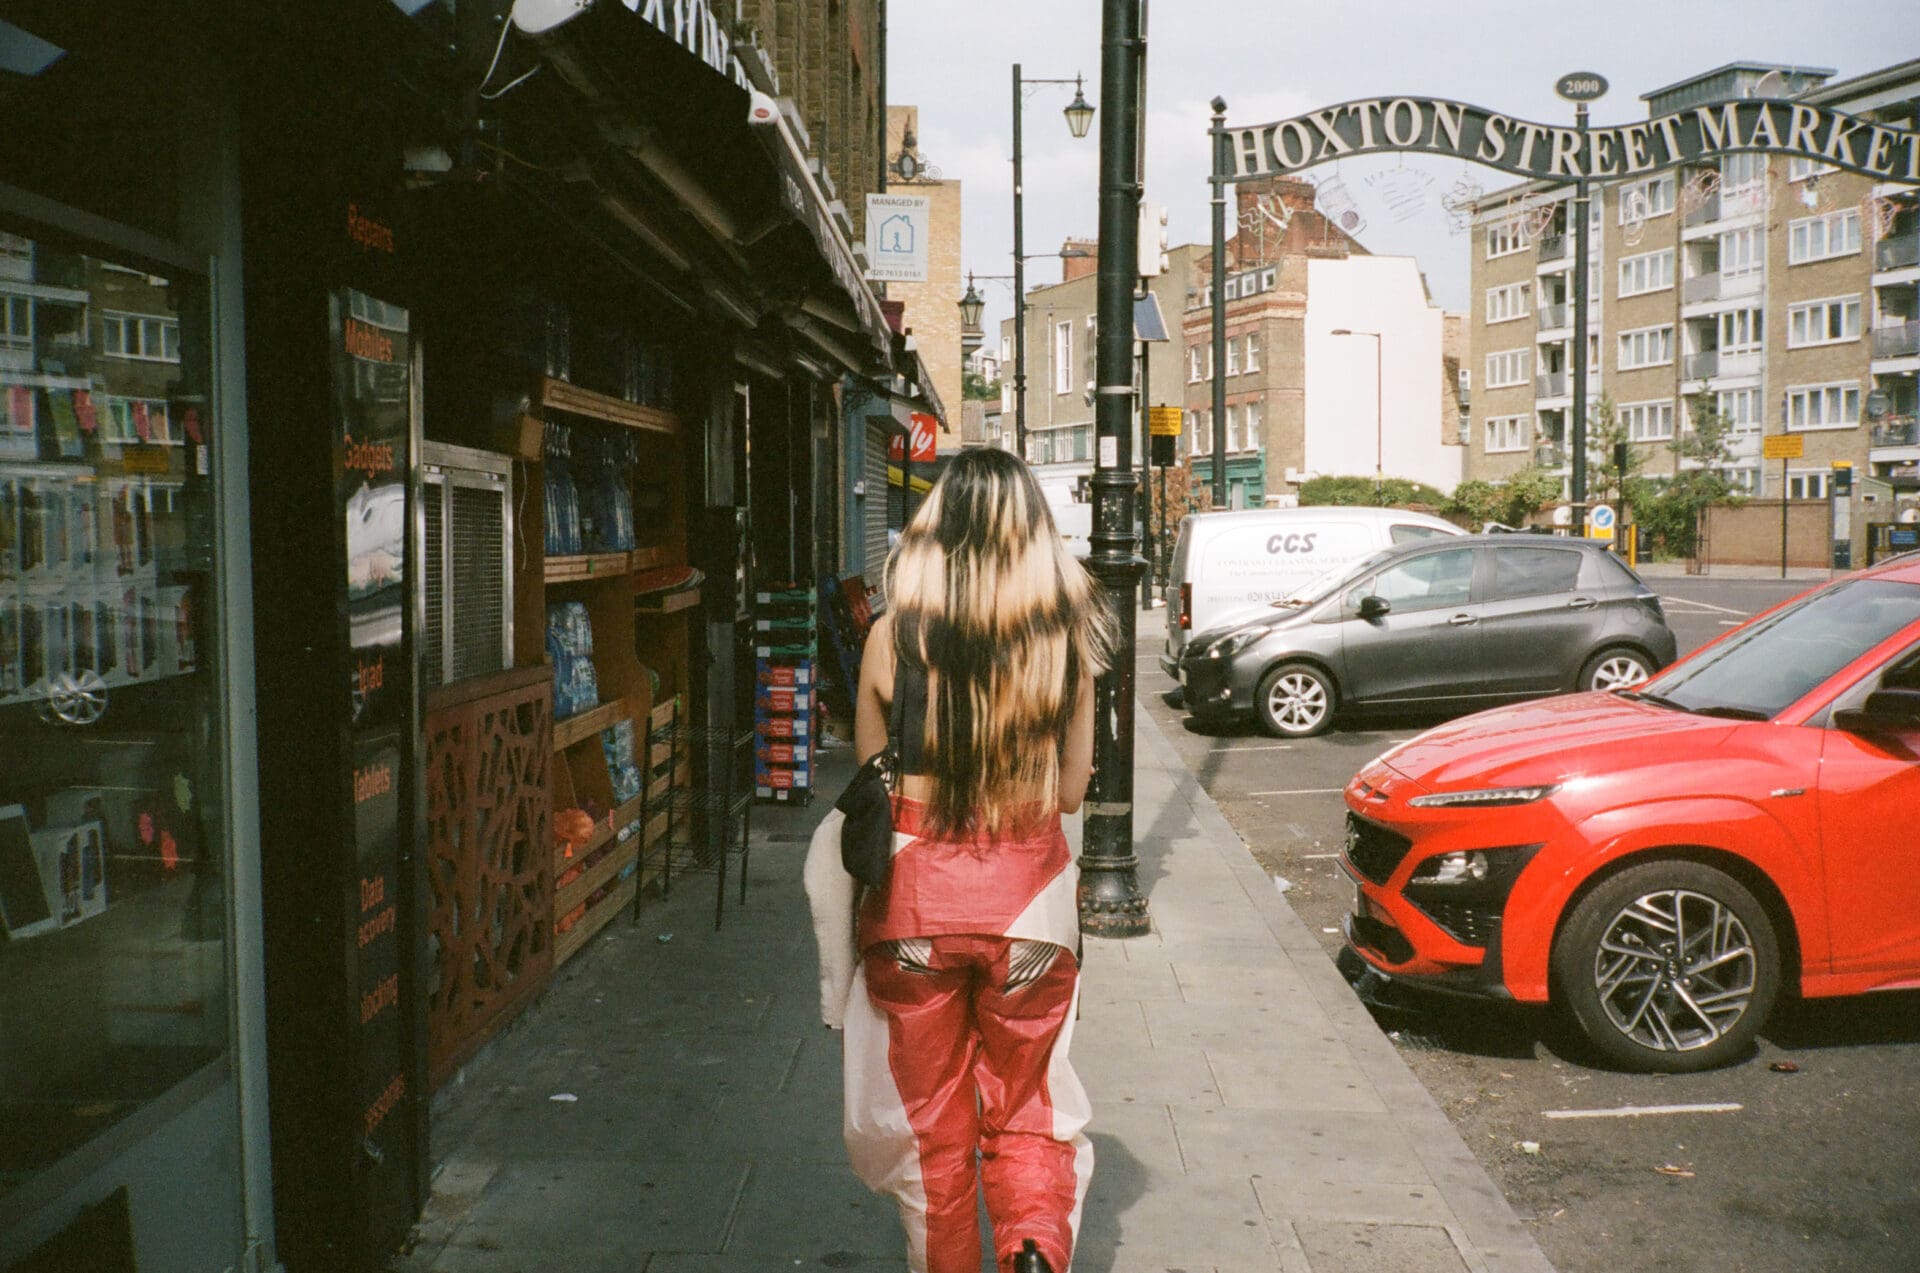 An interview with Thai pop singer Pyra | Pyra walking away from the camera towards a metal Hoxton Street Market sign curving above the road.